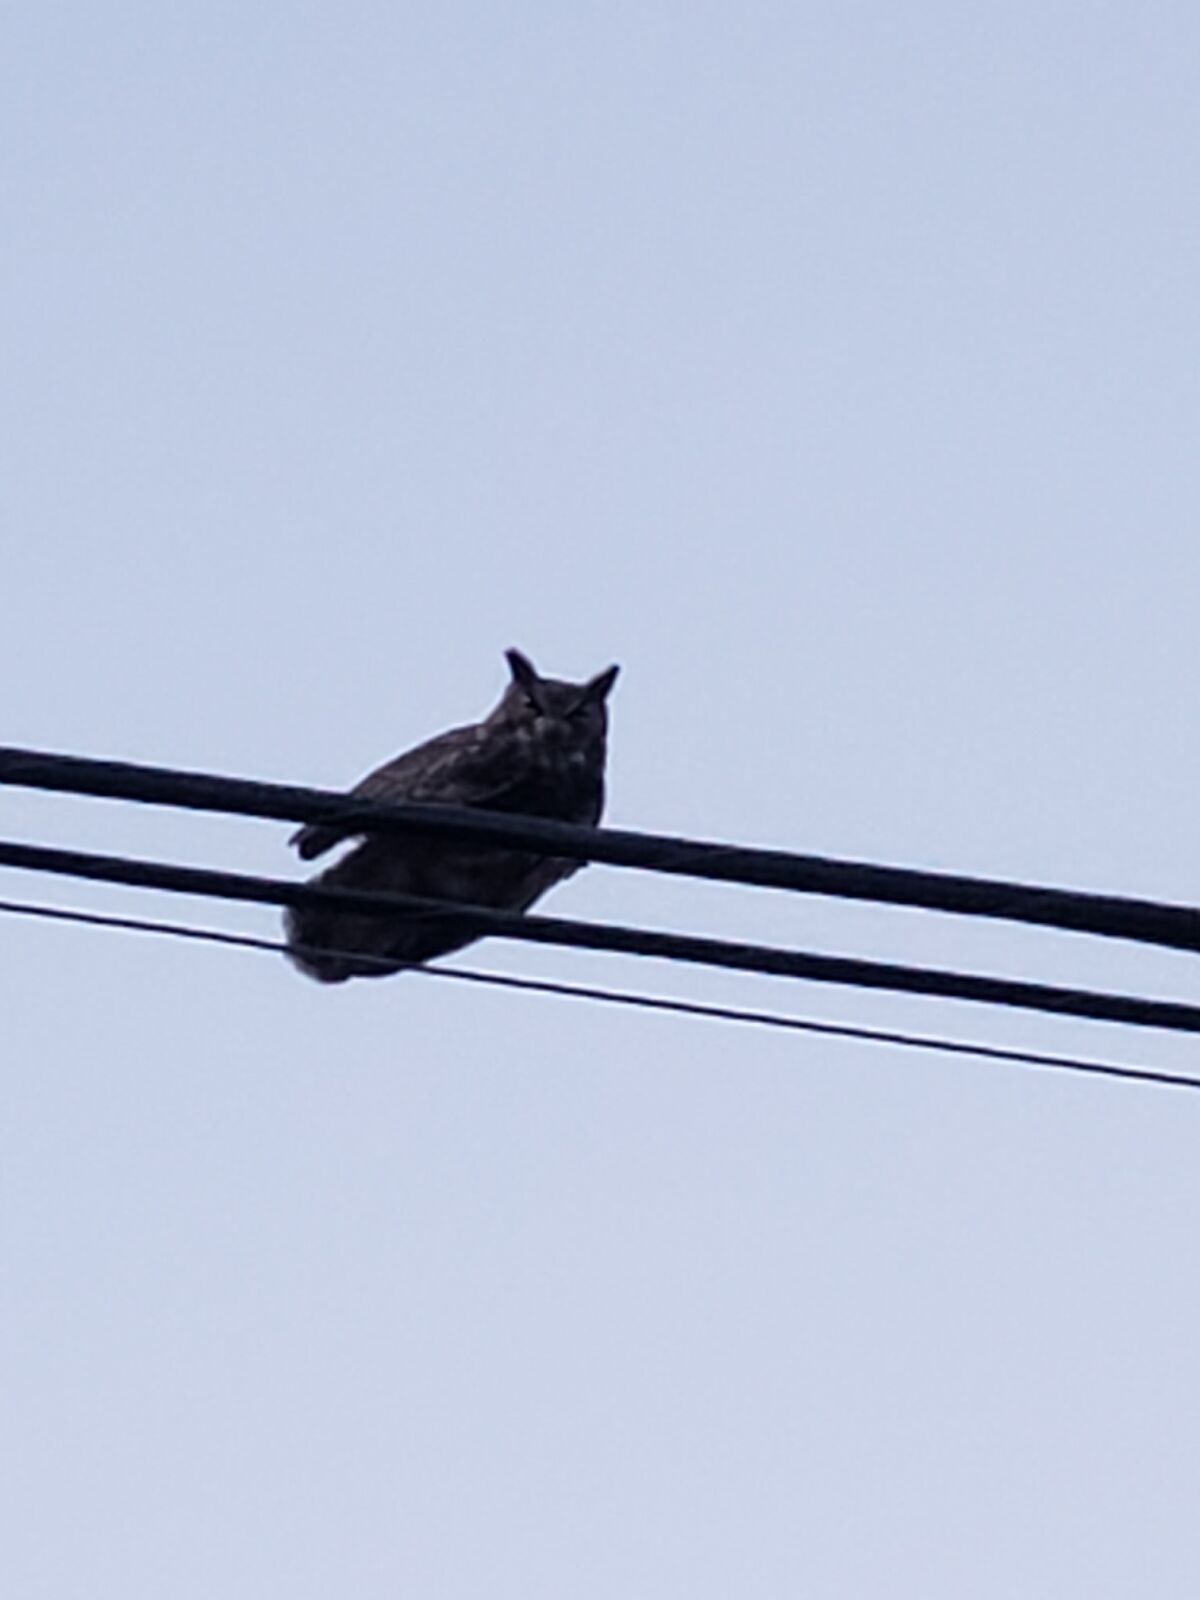 The great horned owl was discovered stuck on utility lines in Ramona and spent part of its time upside down. 